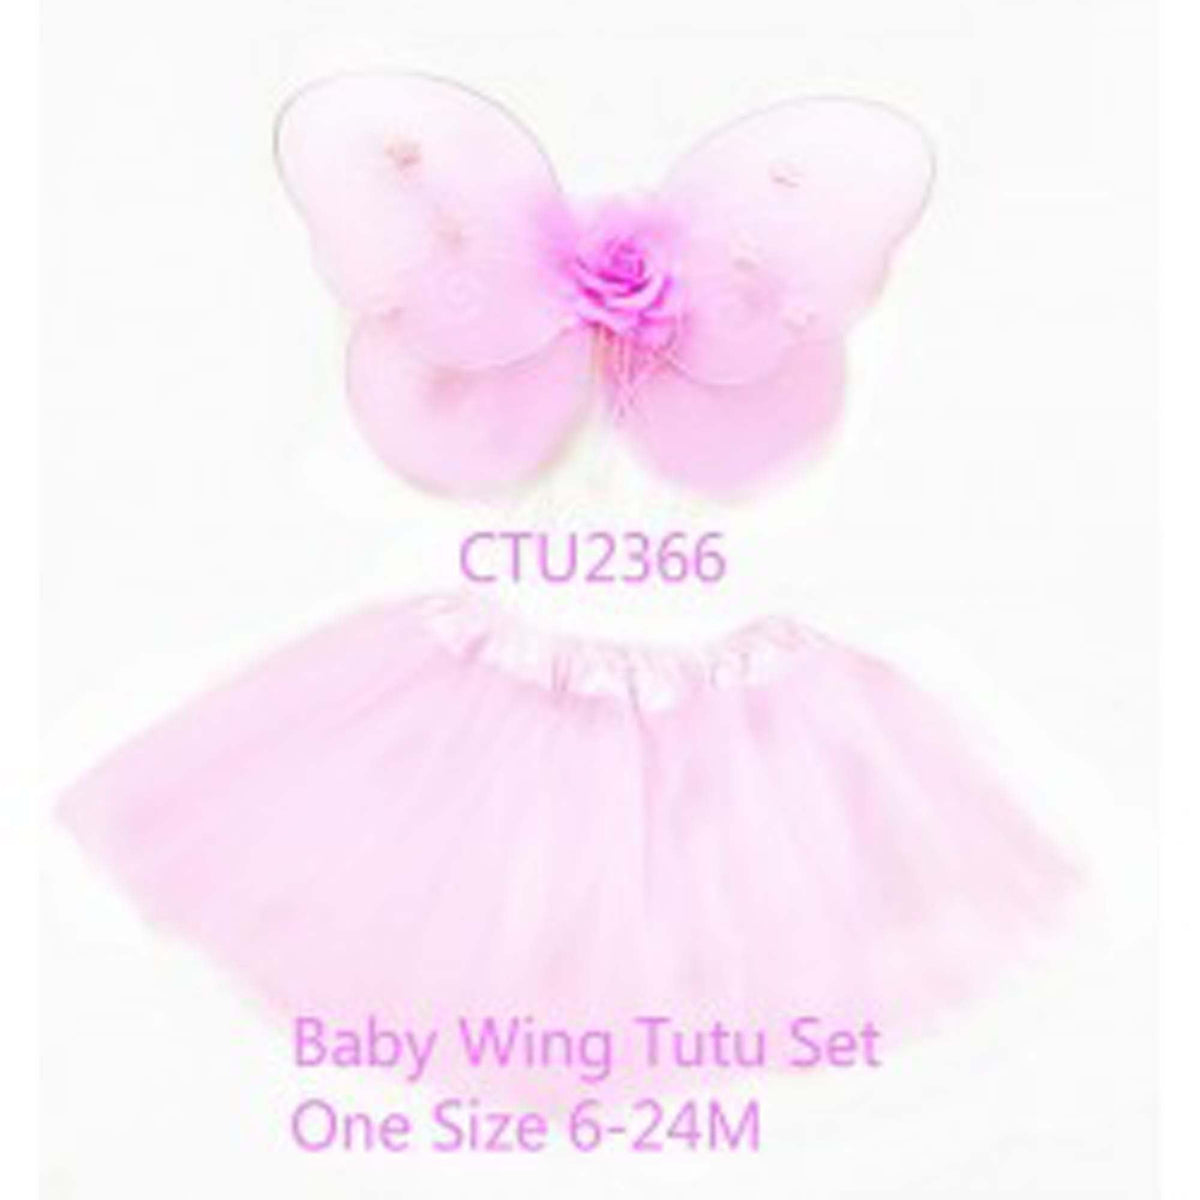 IVY TRADING INC. Costumes Accessories Pink Fairy Costume Kit for Babies and Toddlers, Pink Tutu 8336572236626